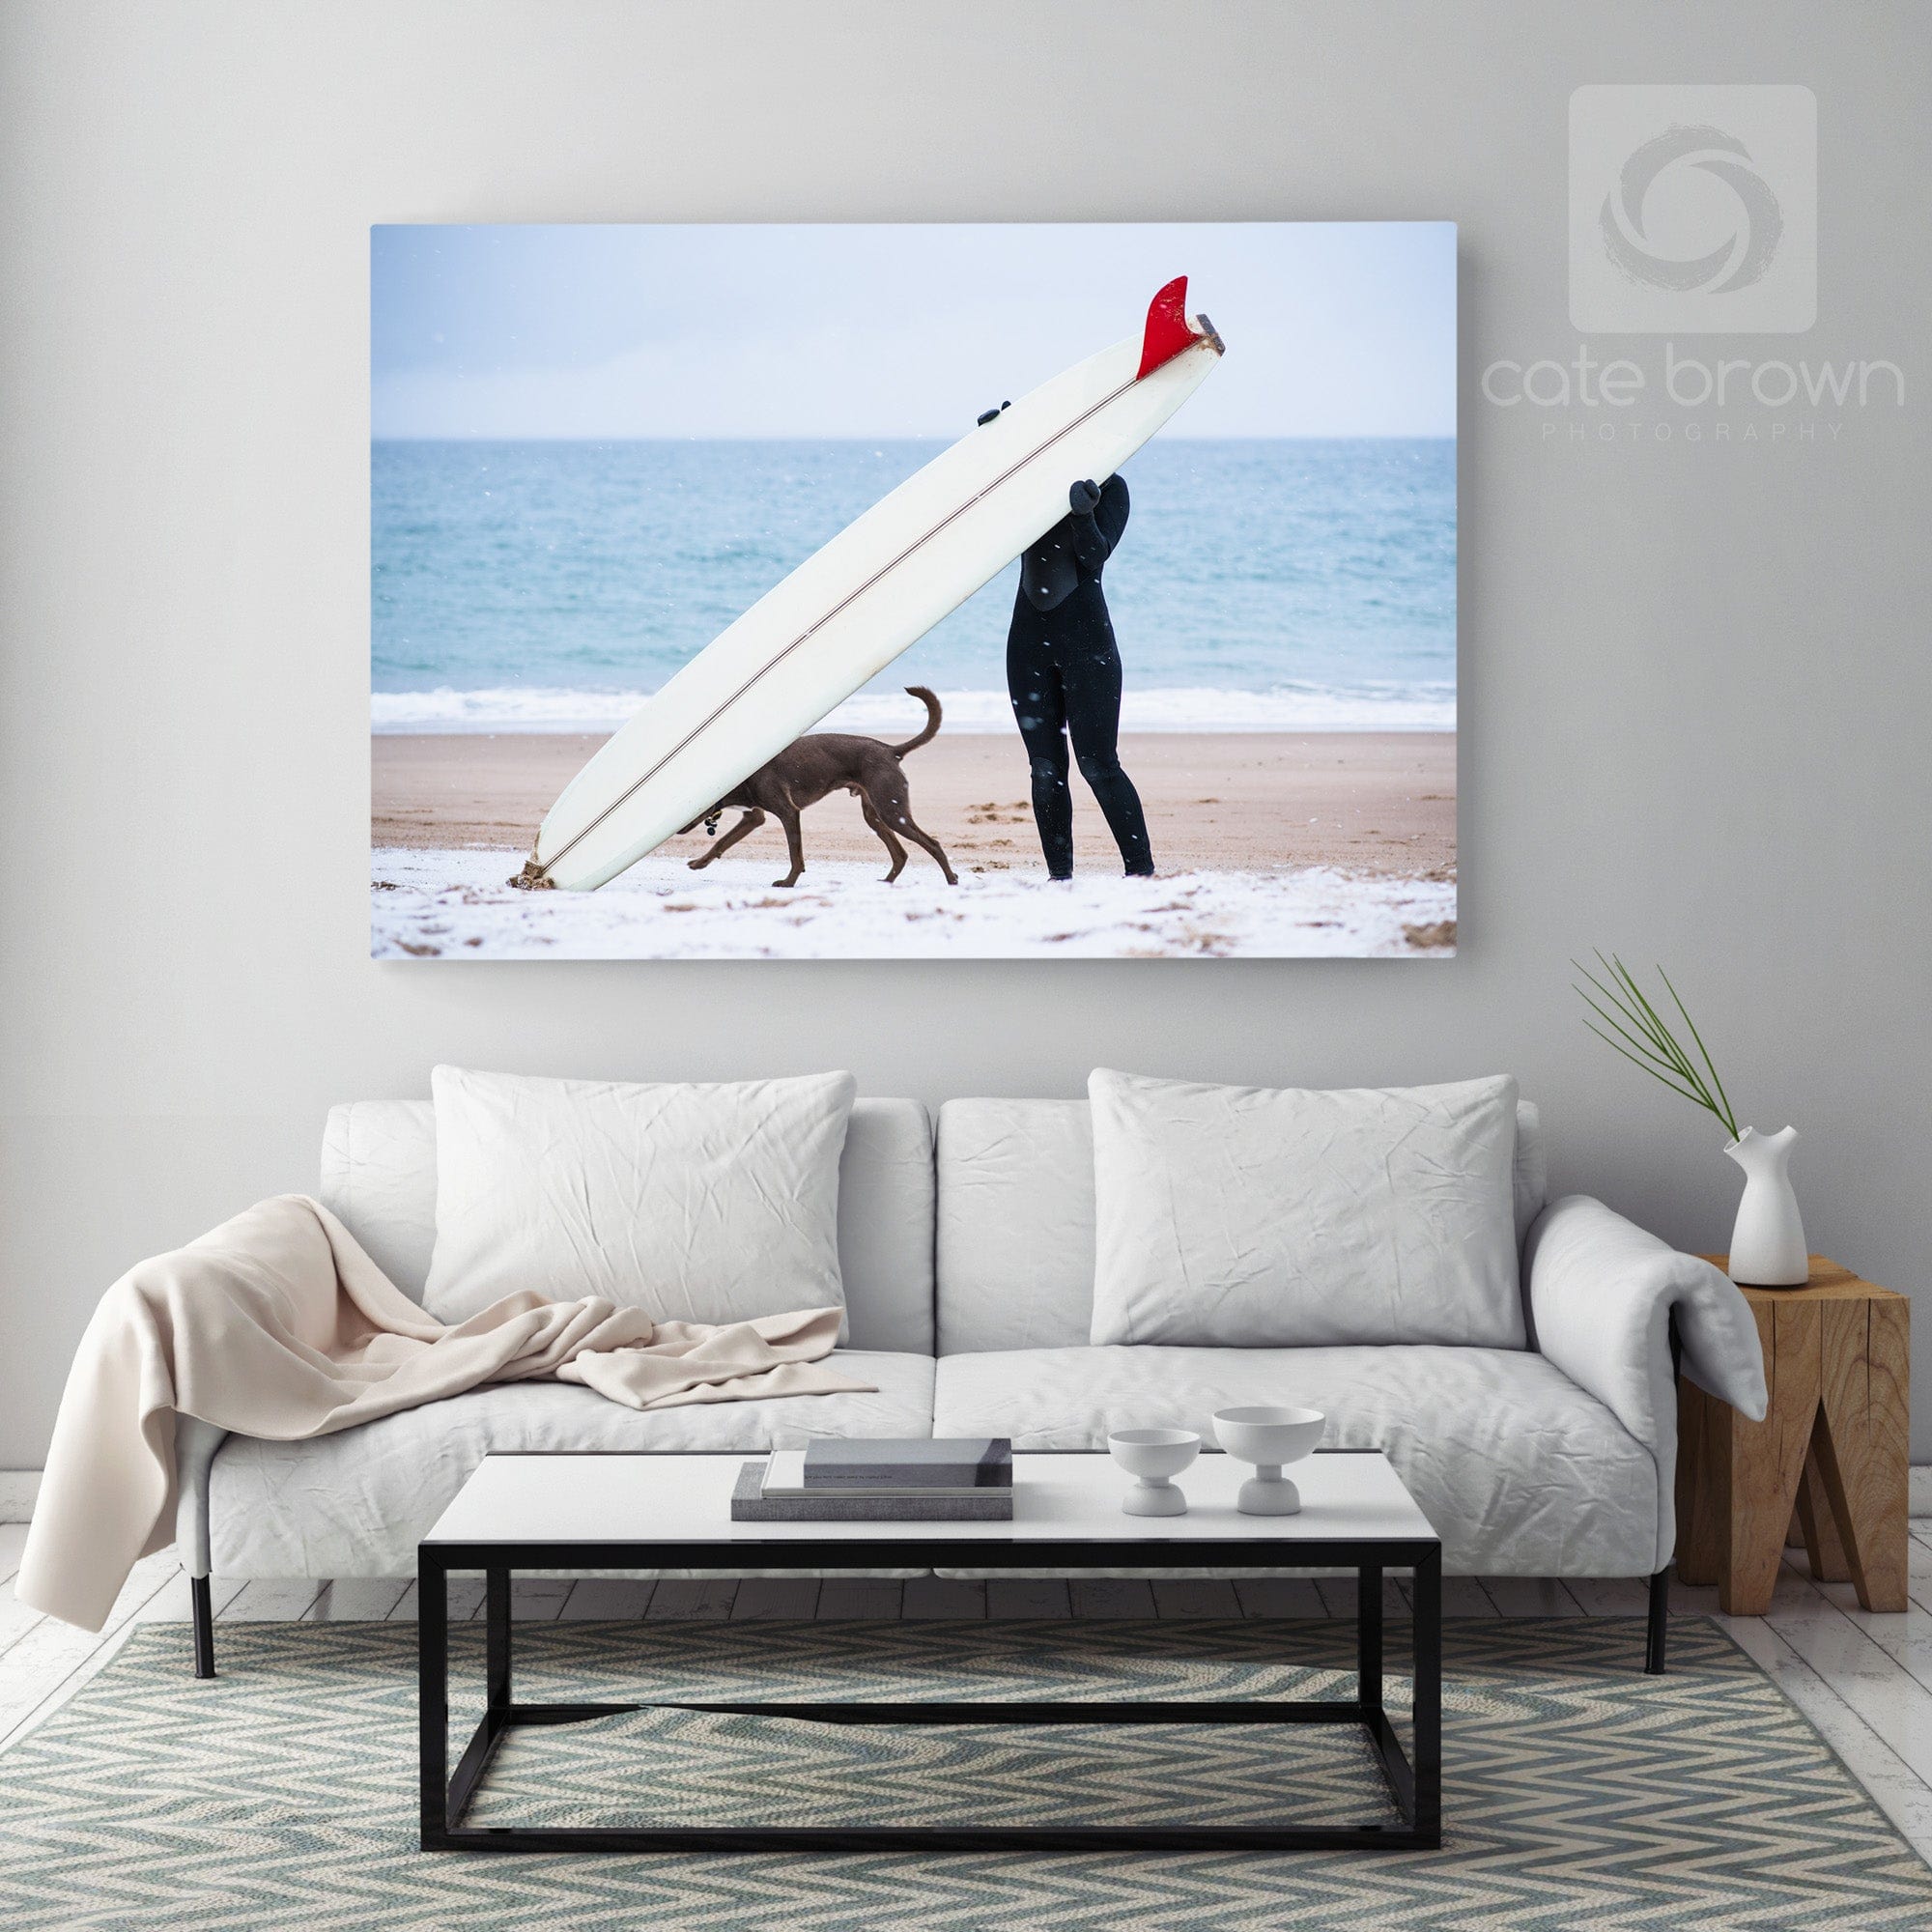 Cate Brown Photo Canvas / 20"x30" / None (Print Only) Snowy Seasons  //  Surf Photography Made to Order Ocean Fine Art